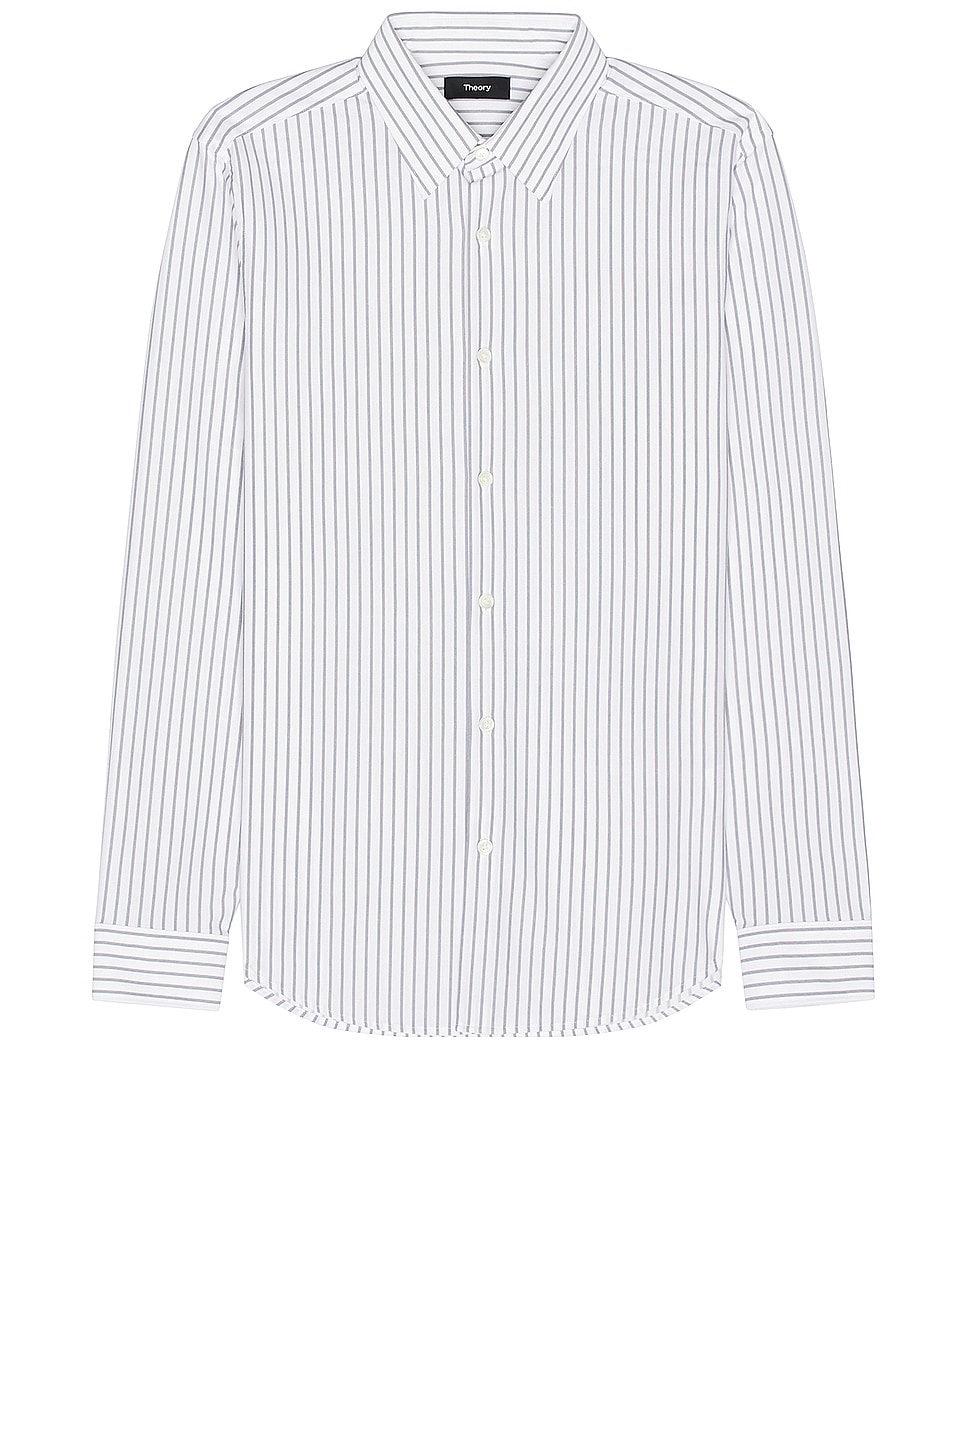 Image 1 of Theory Sylvain And Blaine Stripe Shirt in White & Pestle